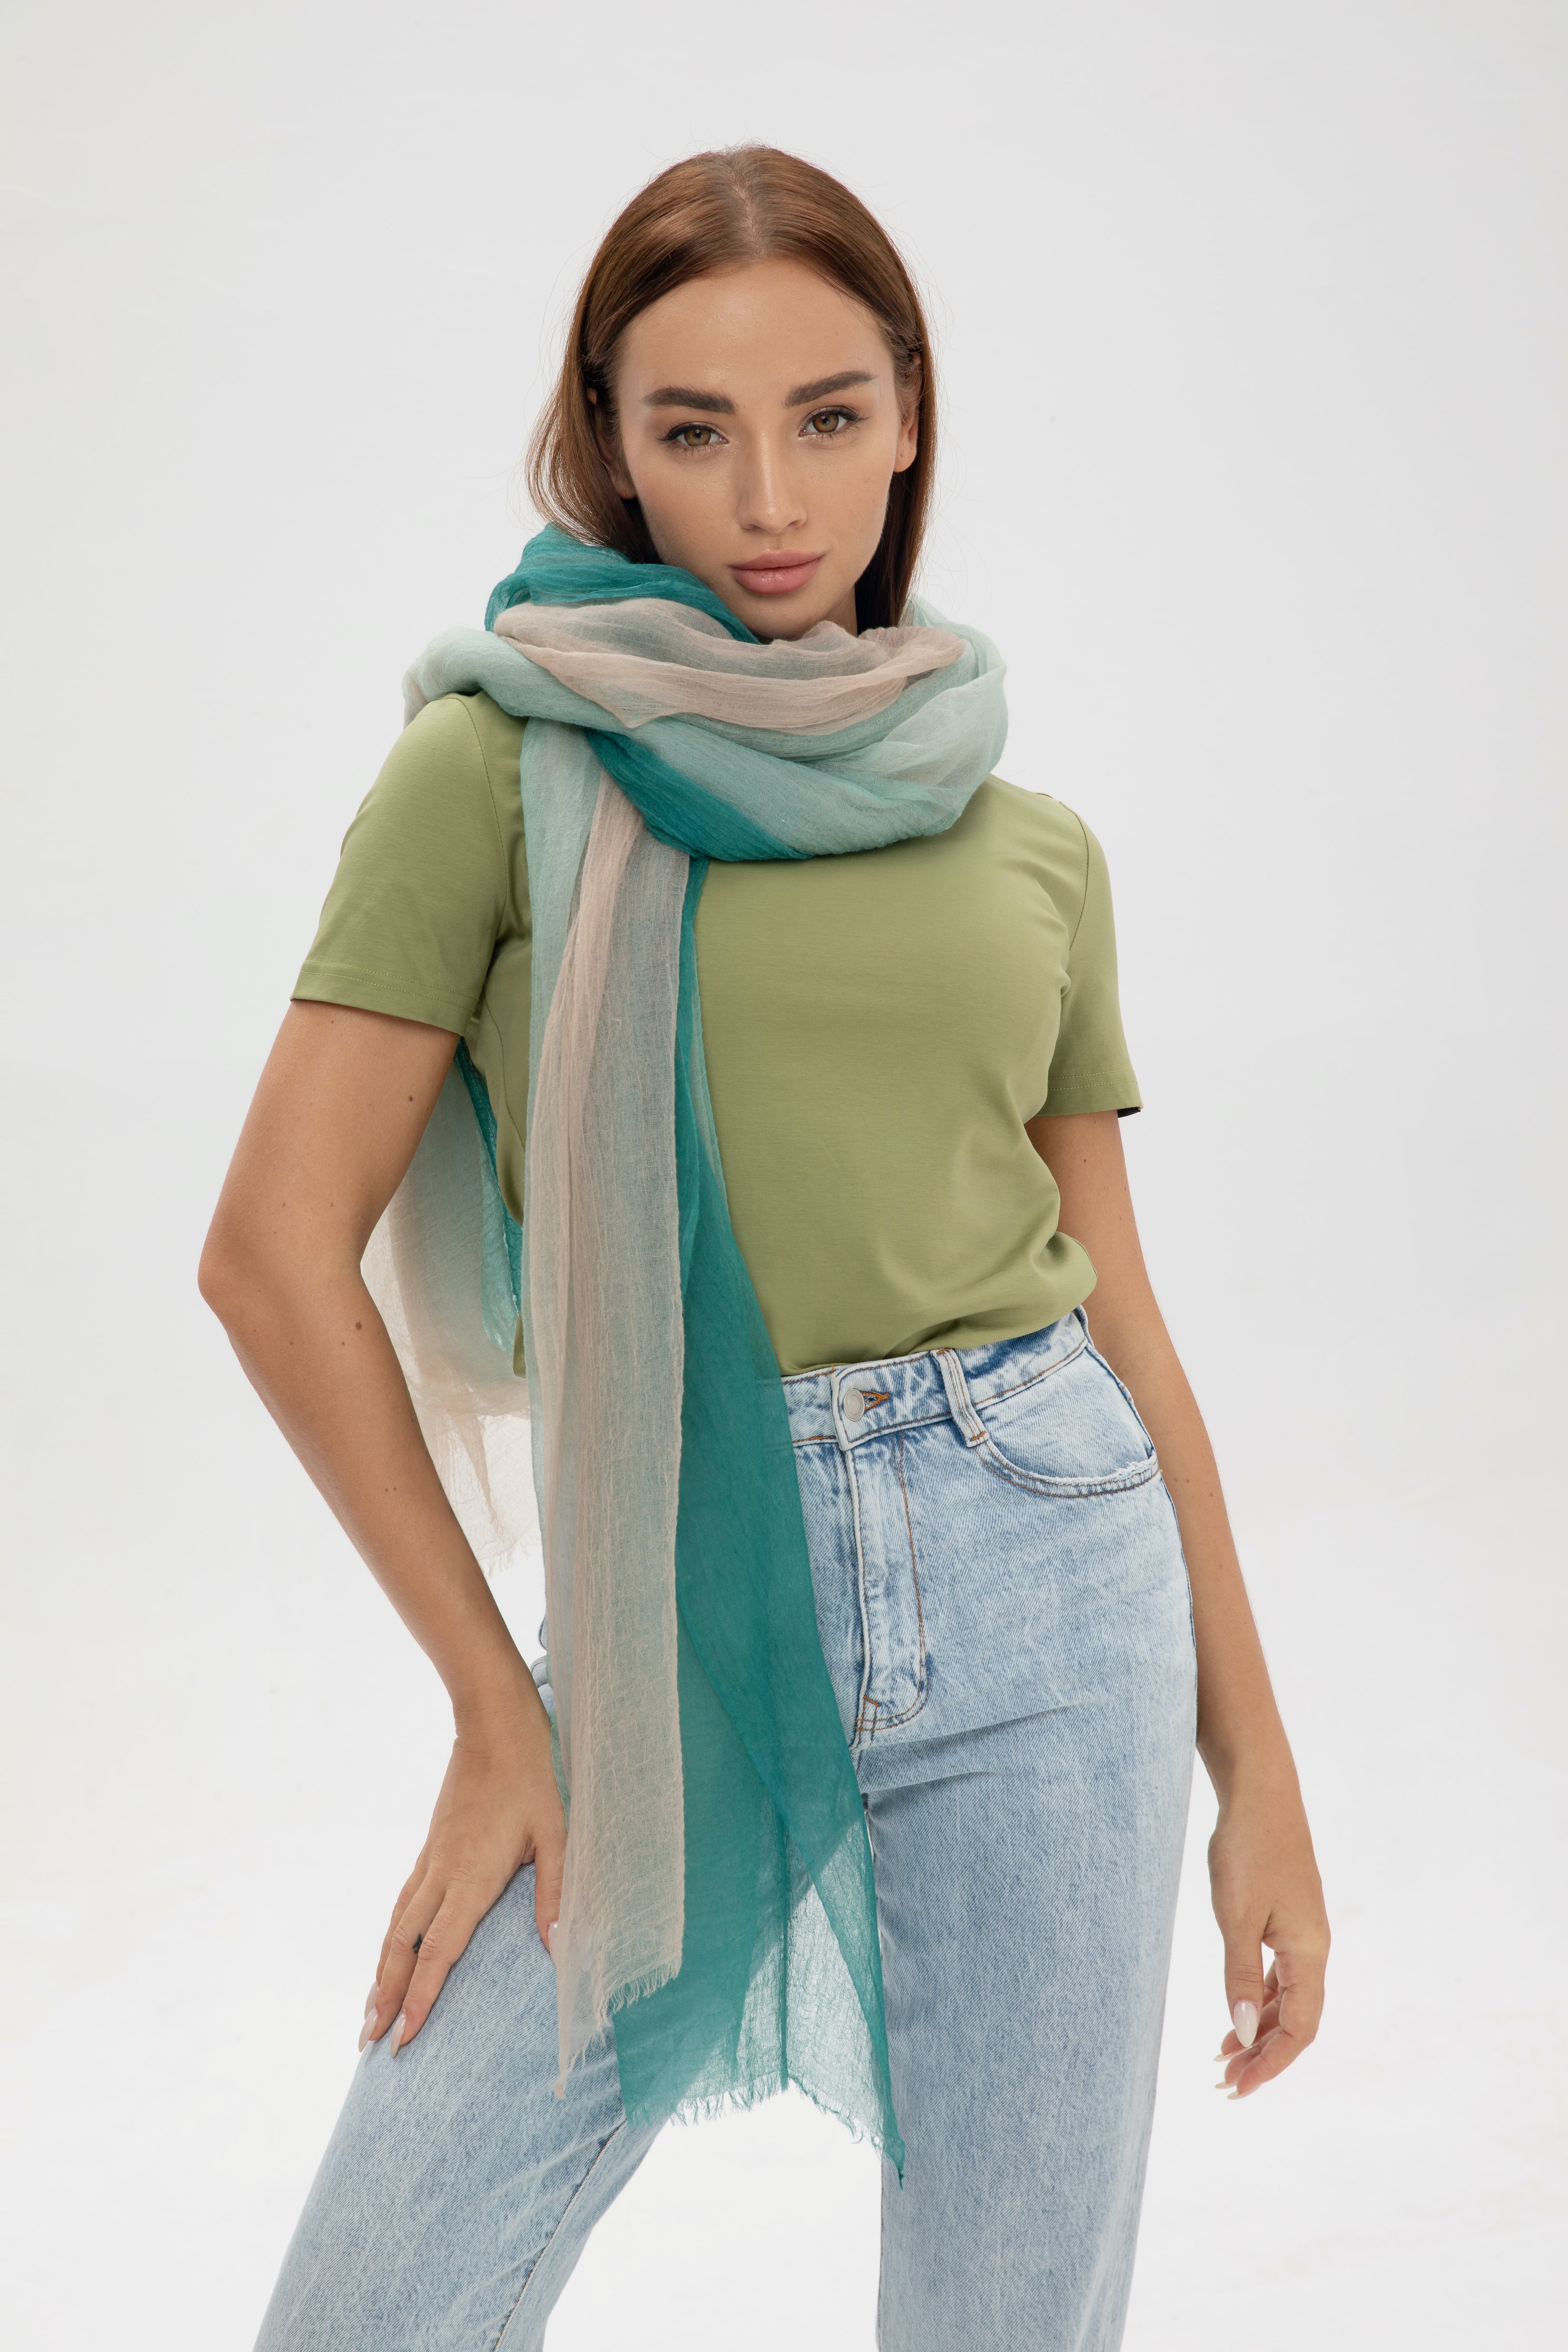 Find The Perfect 100% Cashmere Scarf